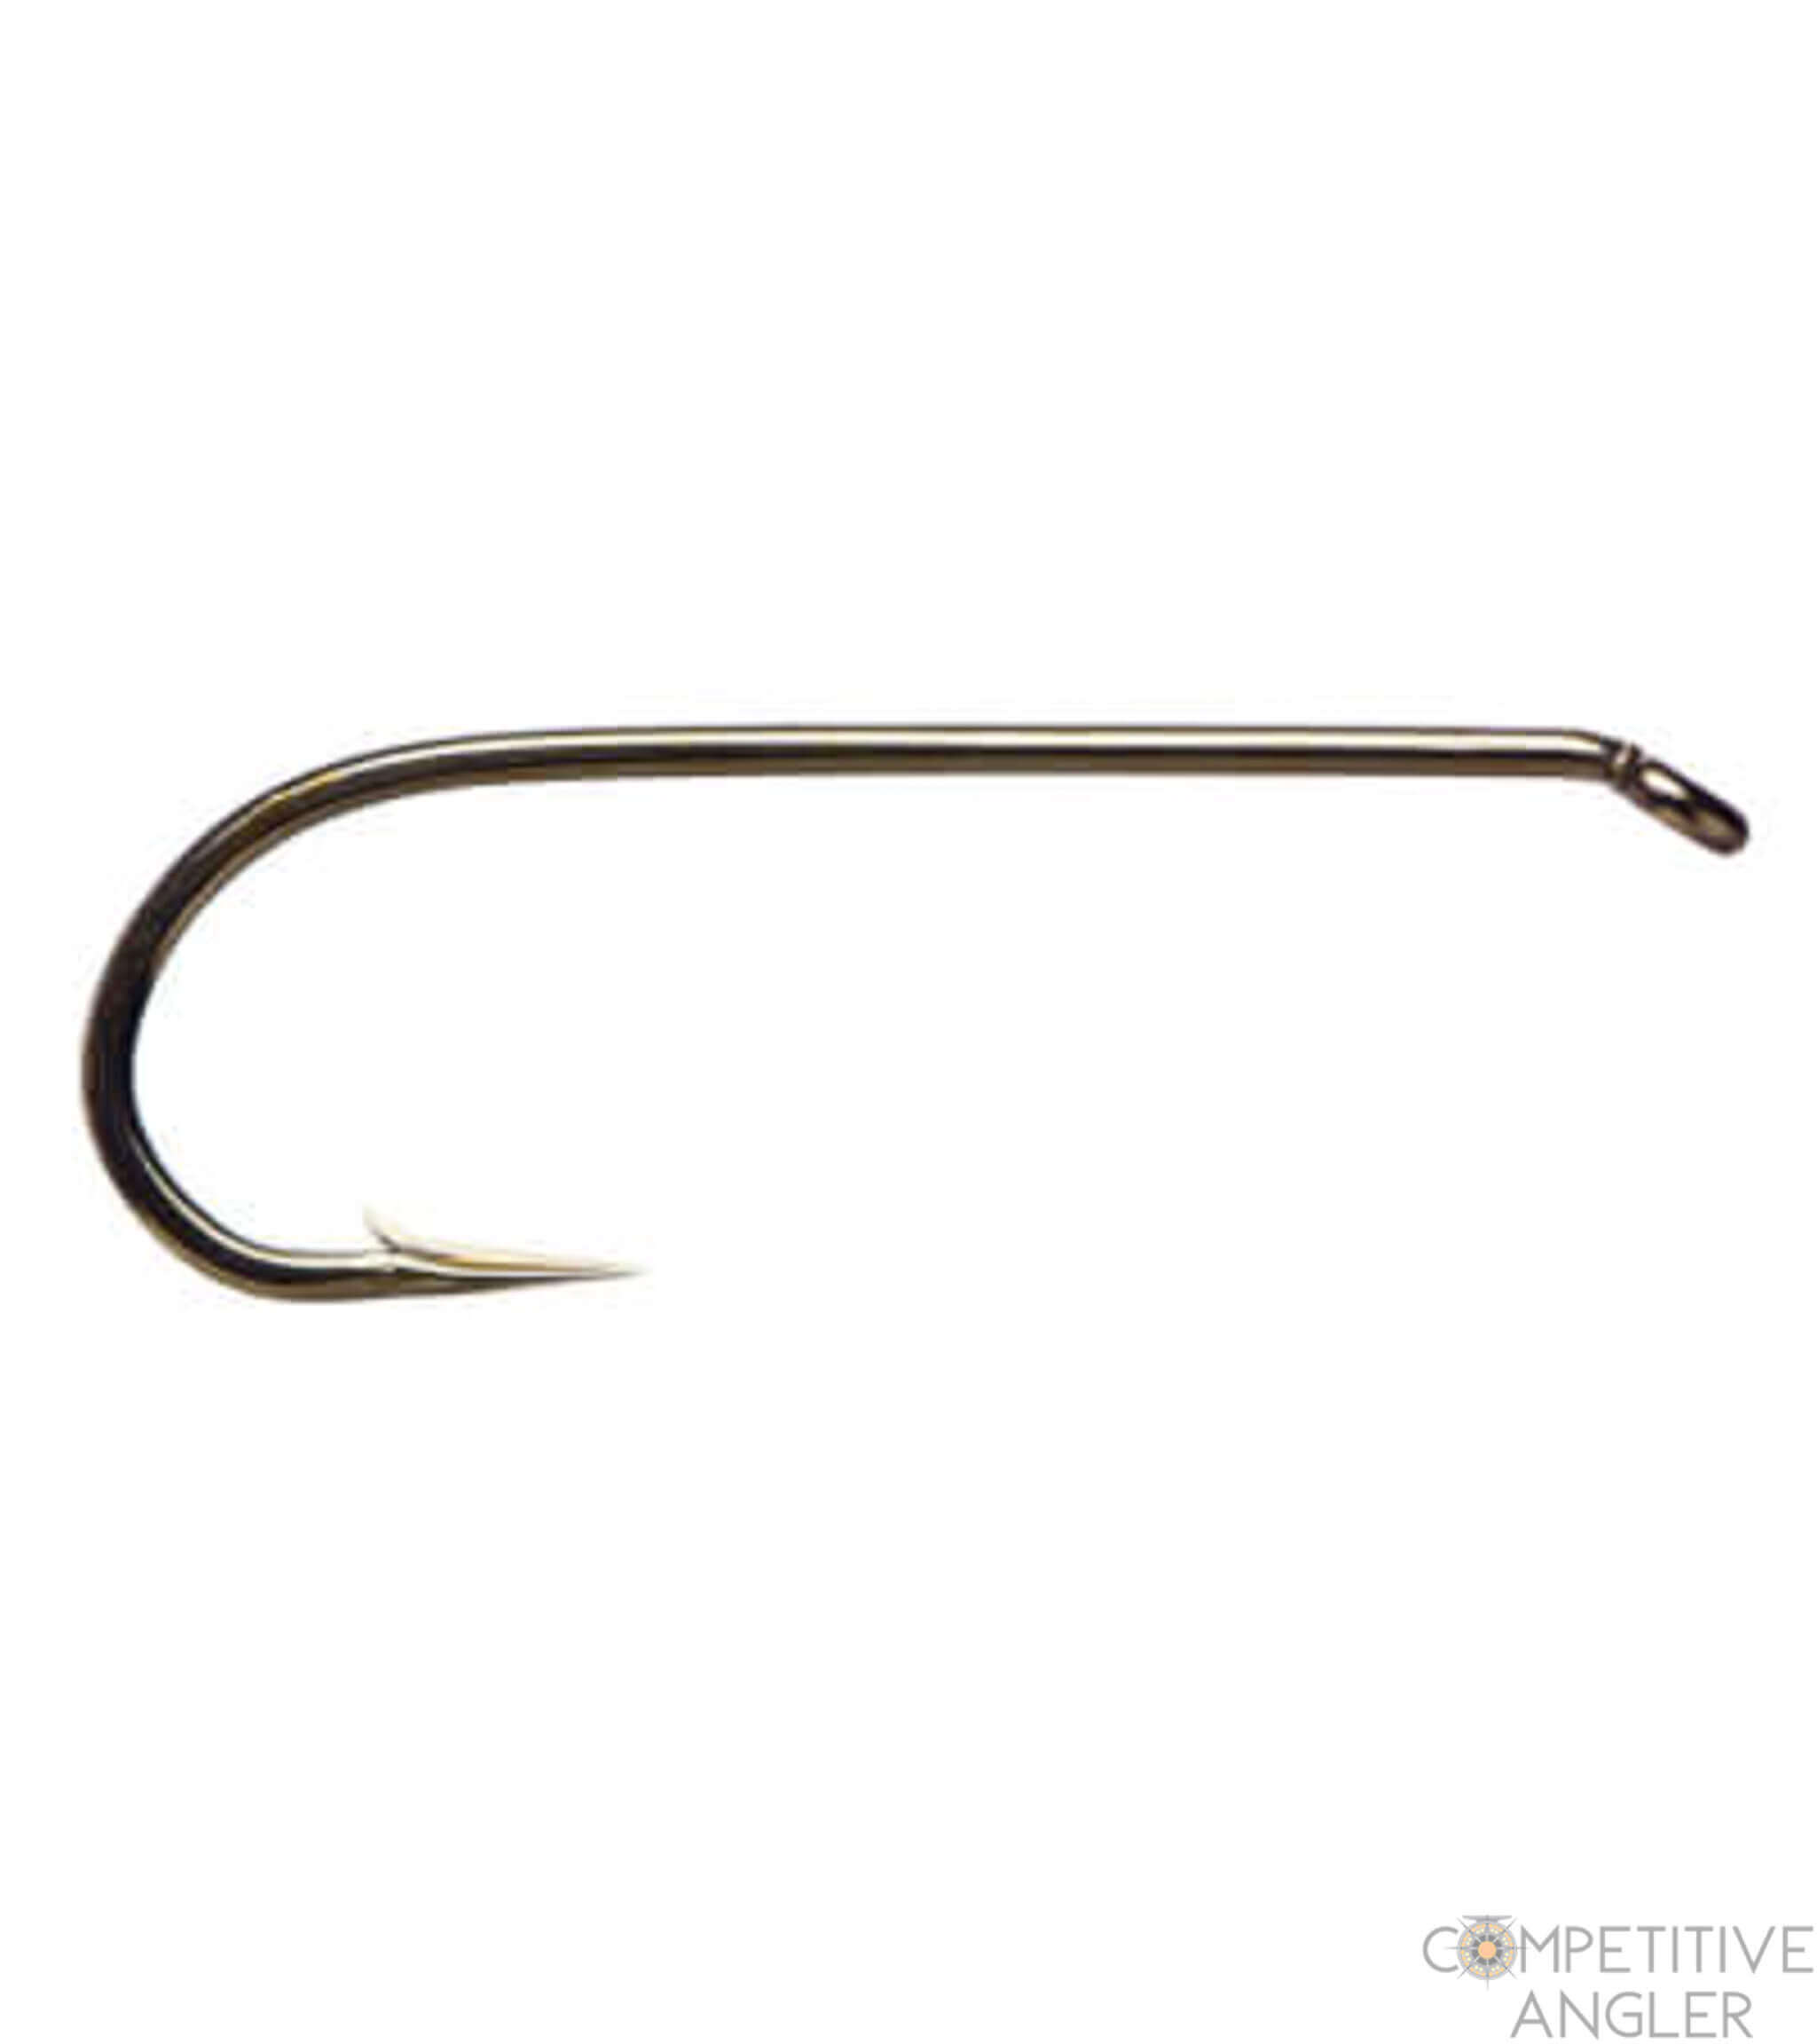 Daiichi 1560 Traditional Nymph Hook - Competitive Angler